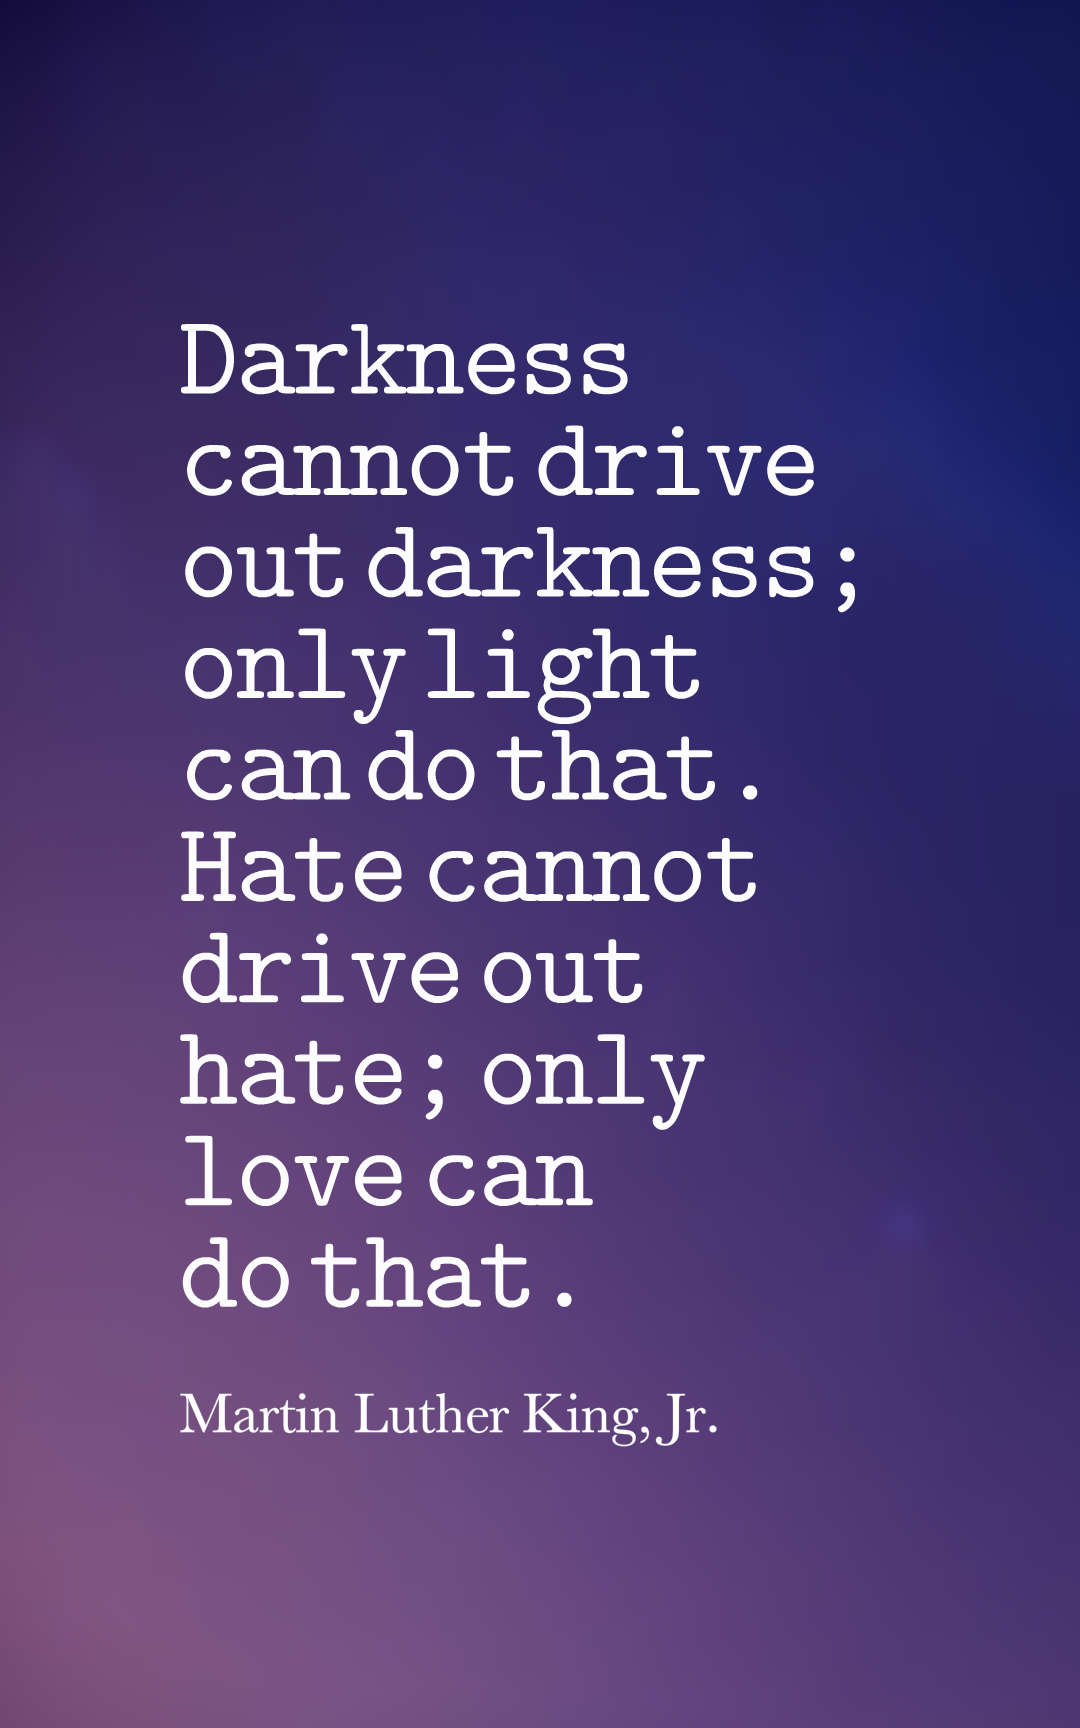 40 Famous Quotes About Darkness and Light